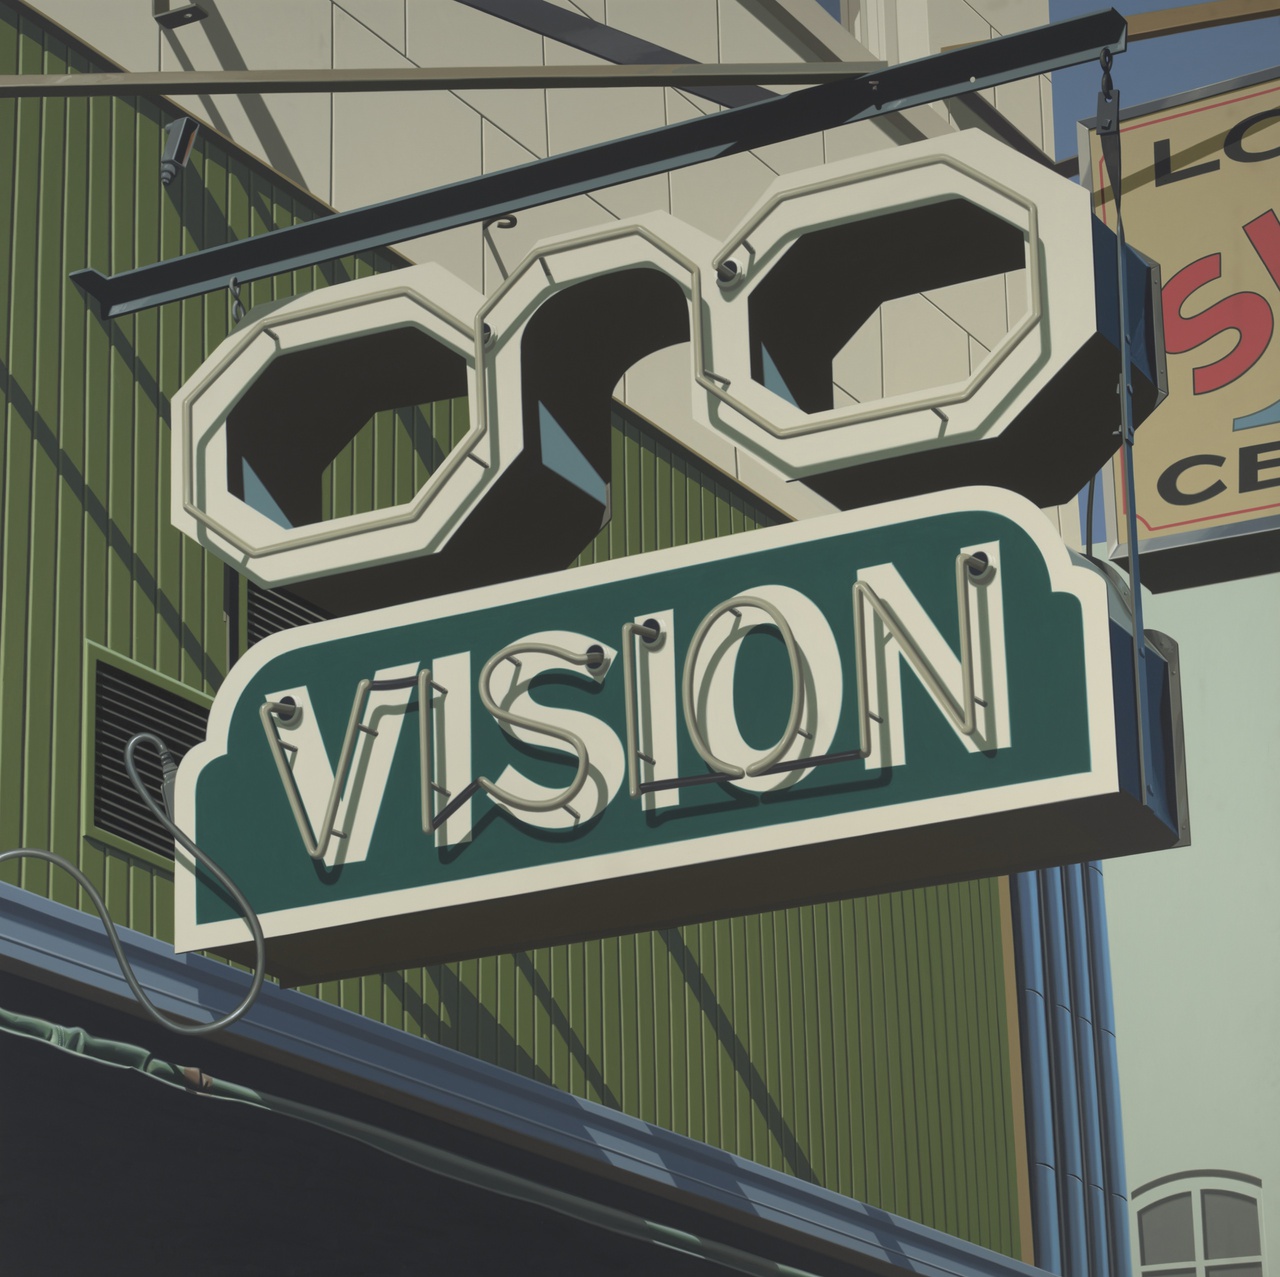 2/11 - Robert Cottingham, Vision, 1973, Collection Centraal Museum